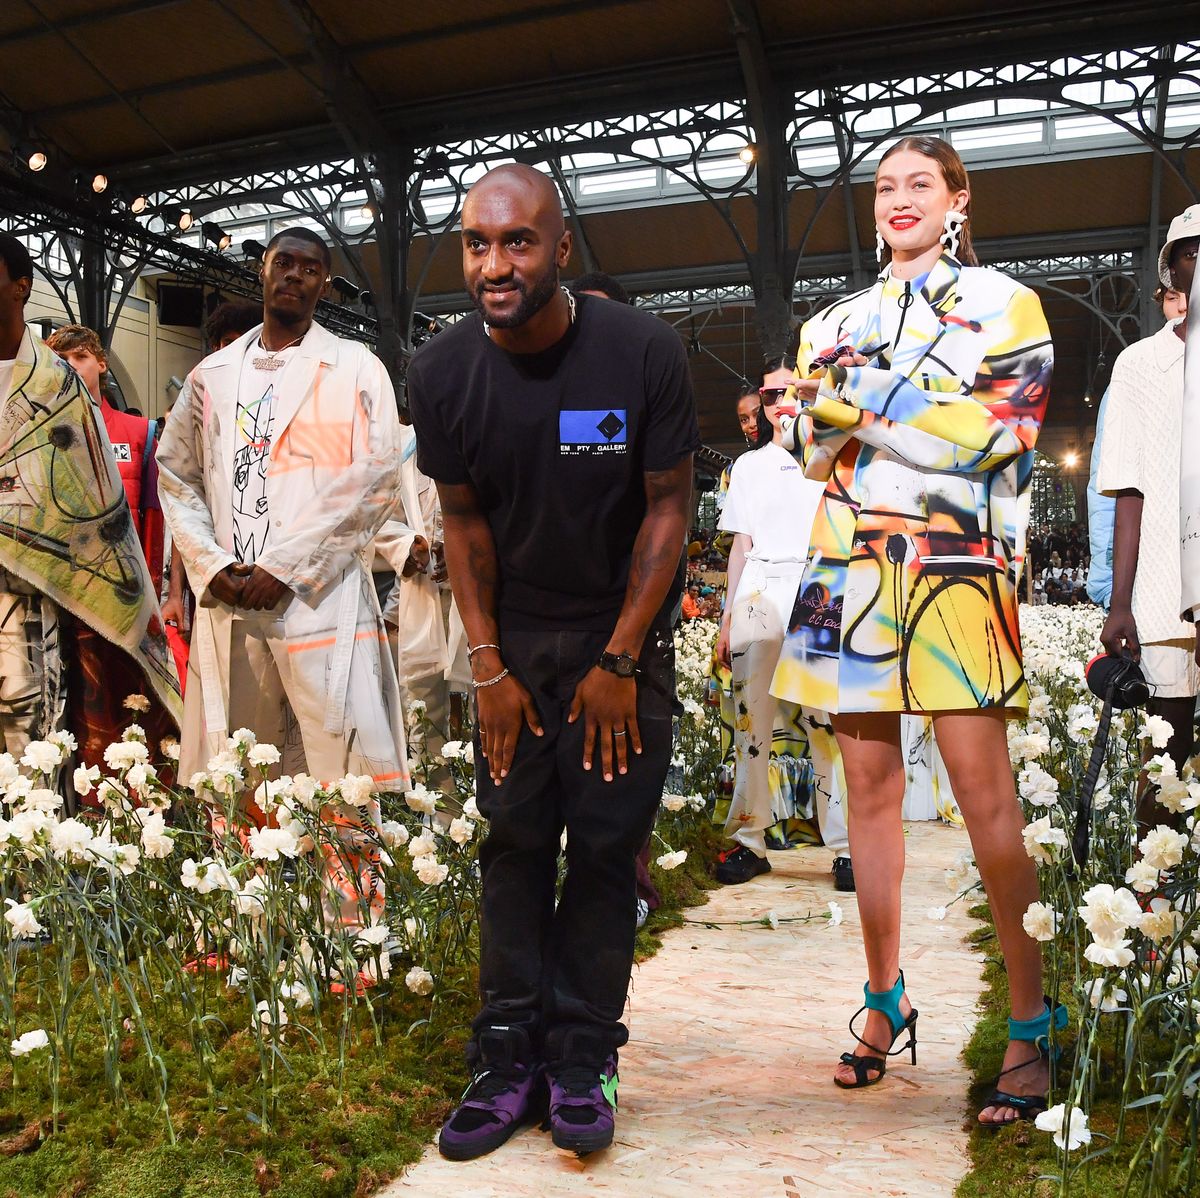 Here's Why Virgil Abloh's New Job at Louis Vuitton Matters